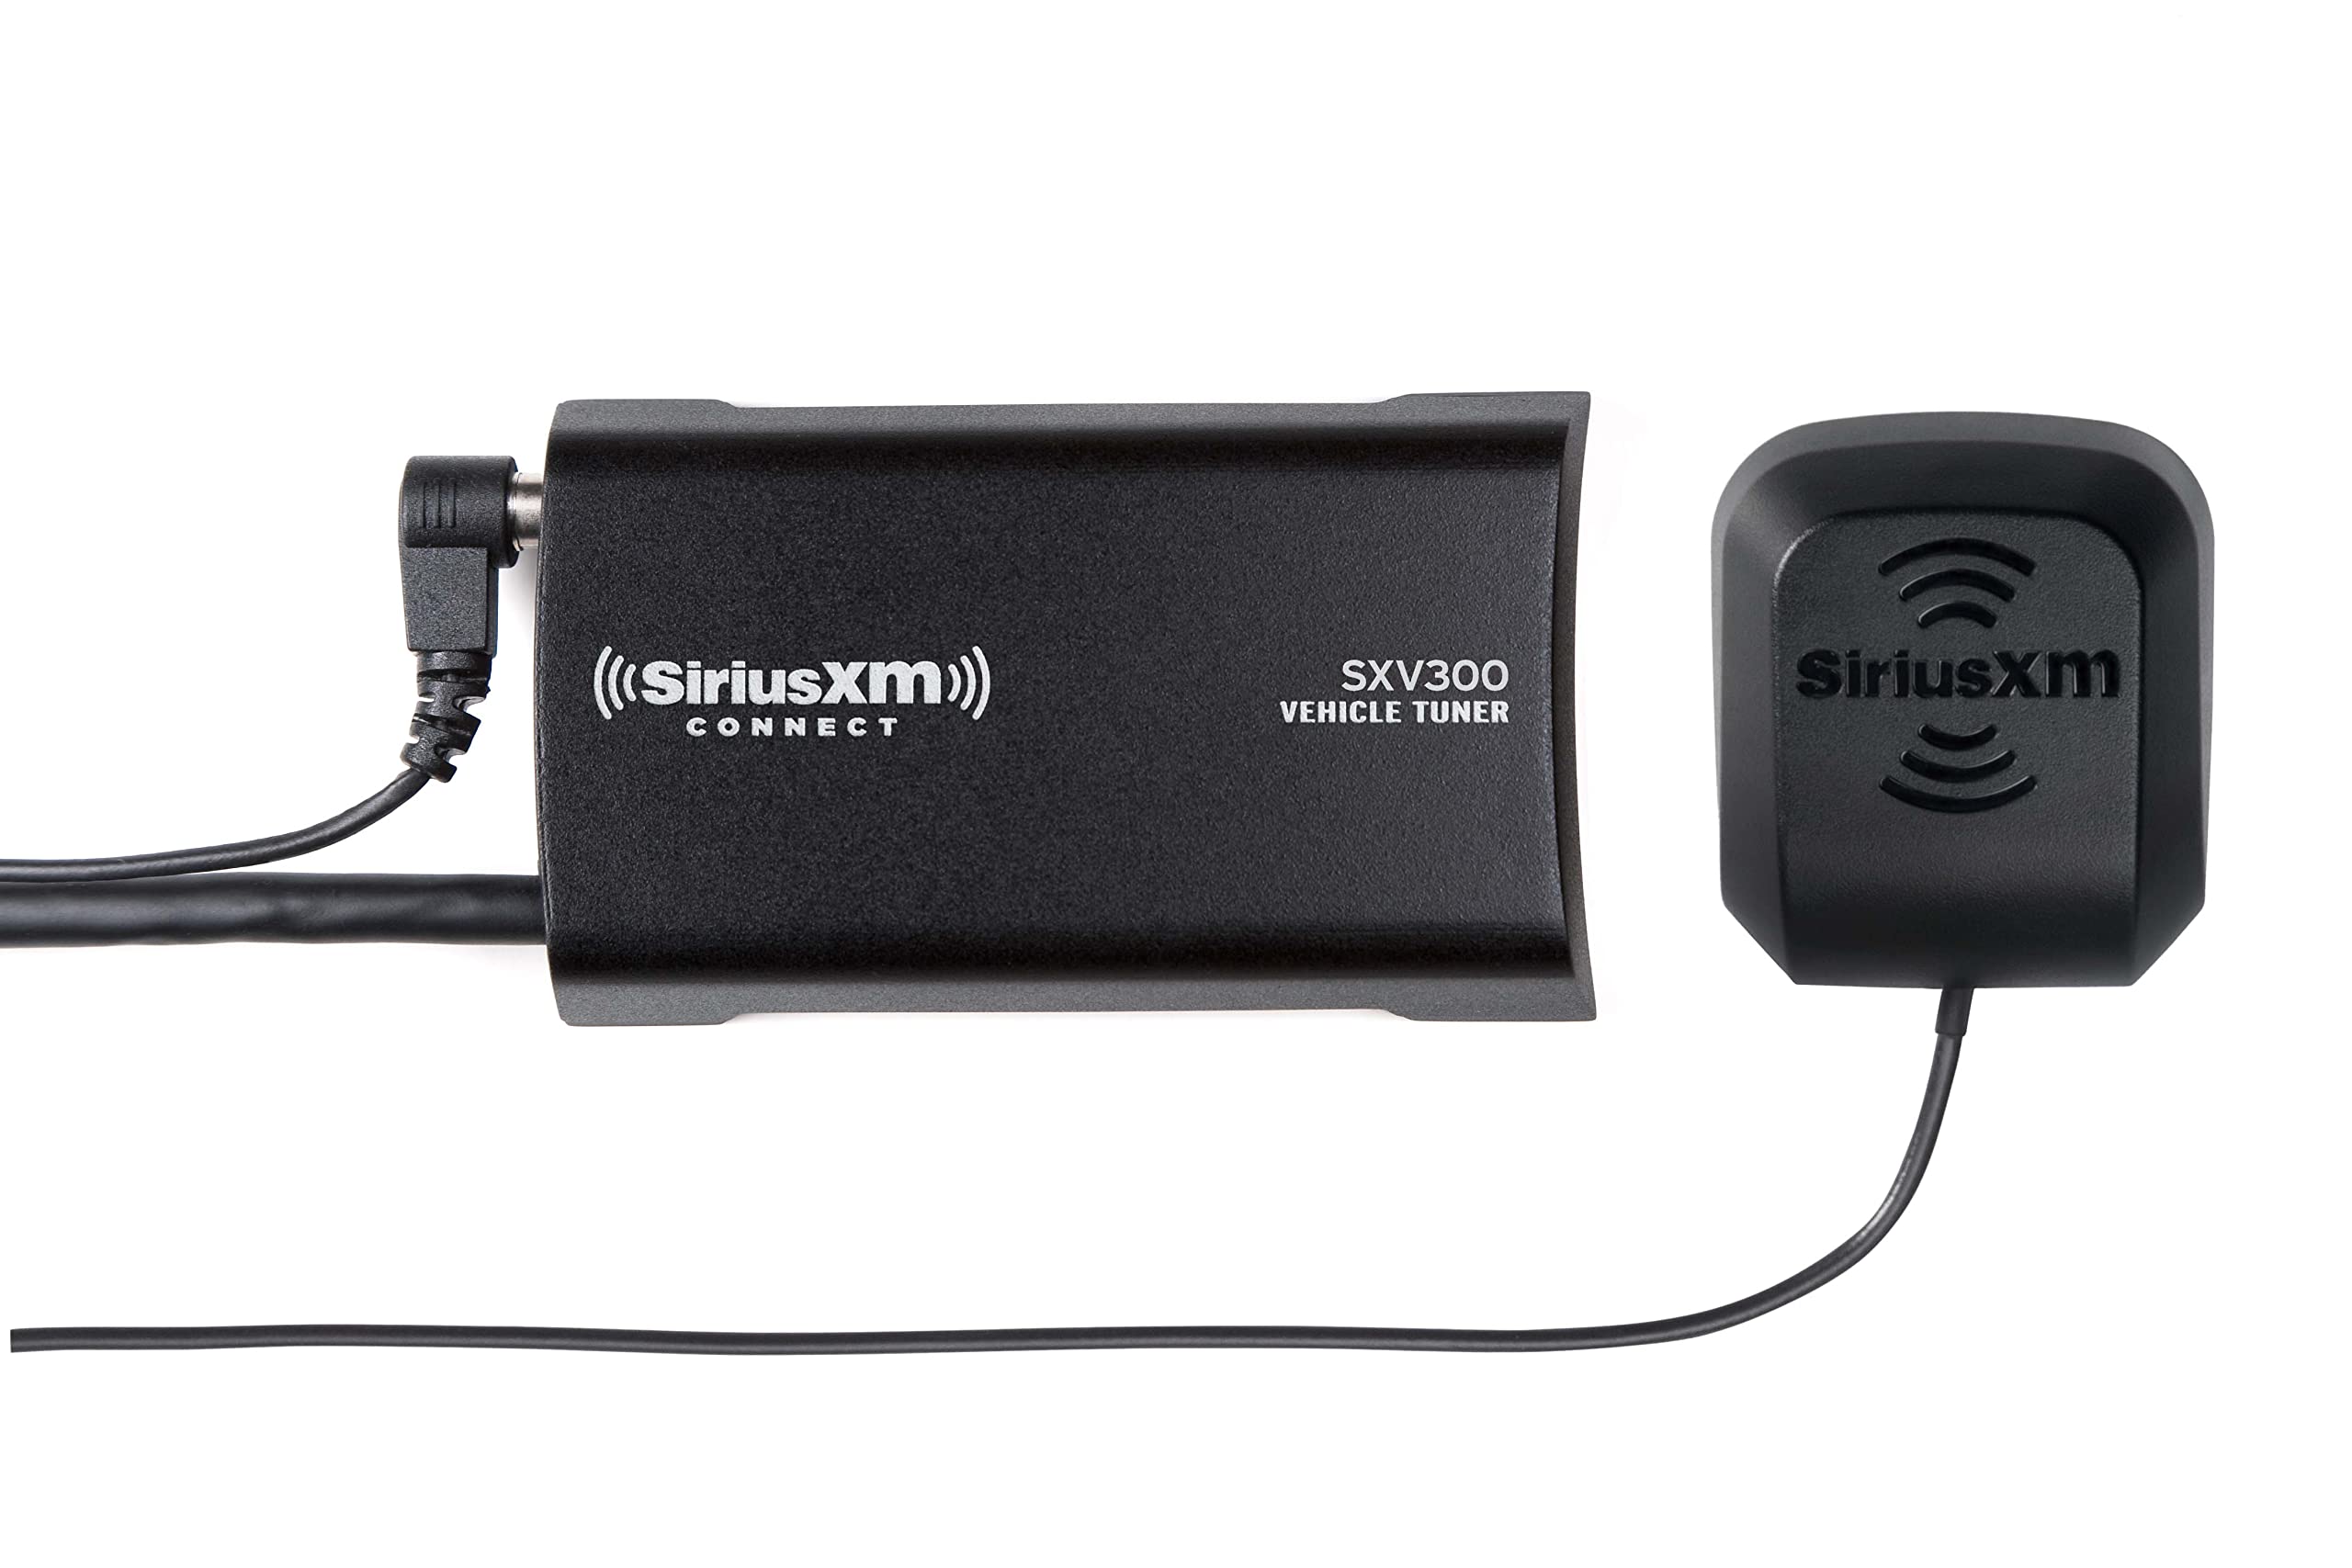 SiriusXM SXV300V1 Satellite Radio Vehicle Tuner, Add to Any SiriusXM-Ready Car Stereo, Enjoy SiriusXM for as Low as $5/month + $60 Service Card with Activation